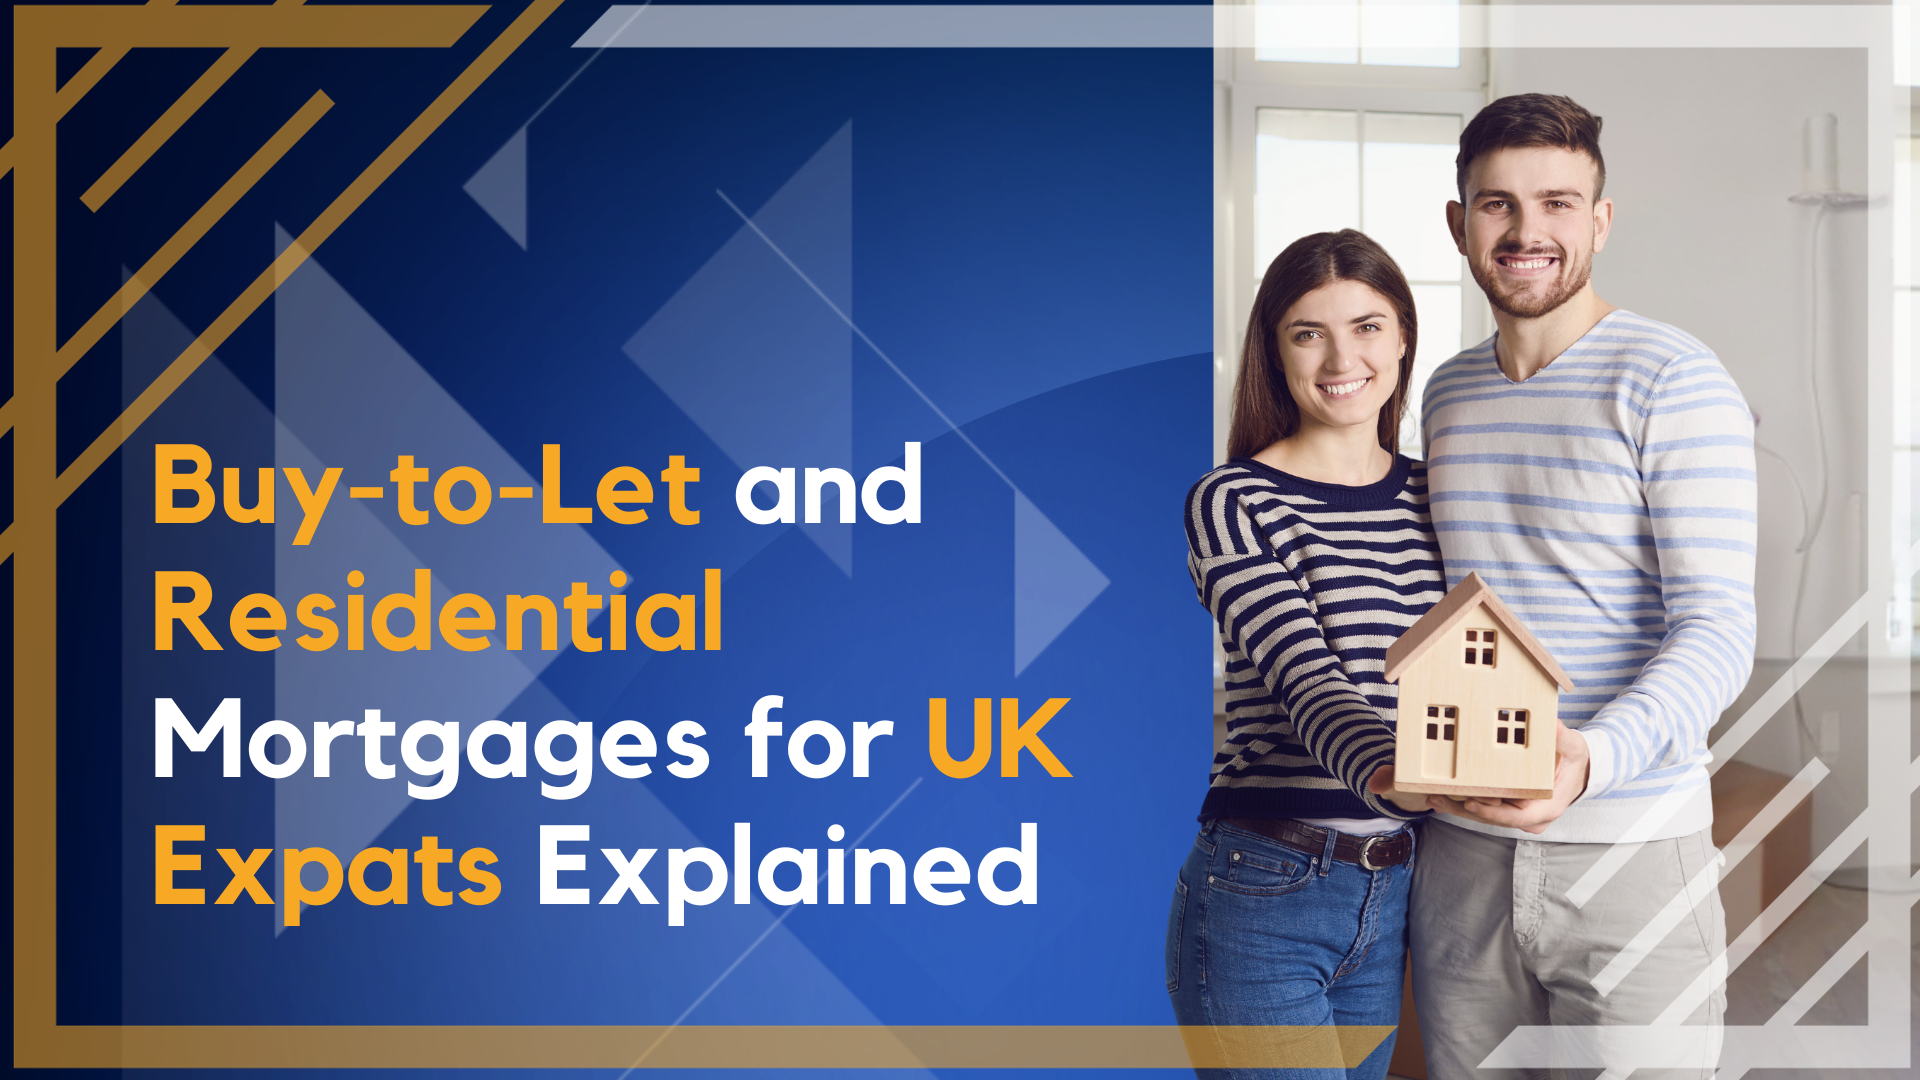 Buy-to-Let and Residential Mortgages for UK Expats Explained    image